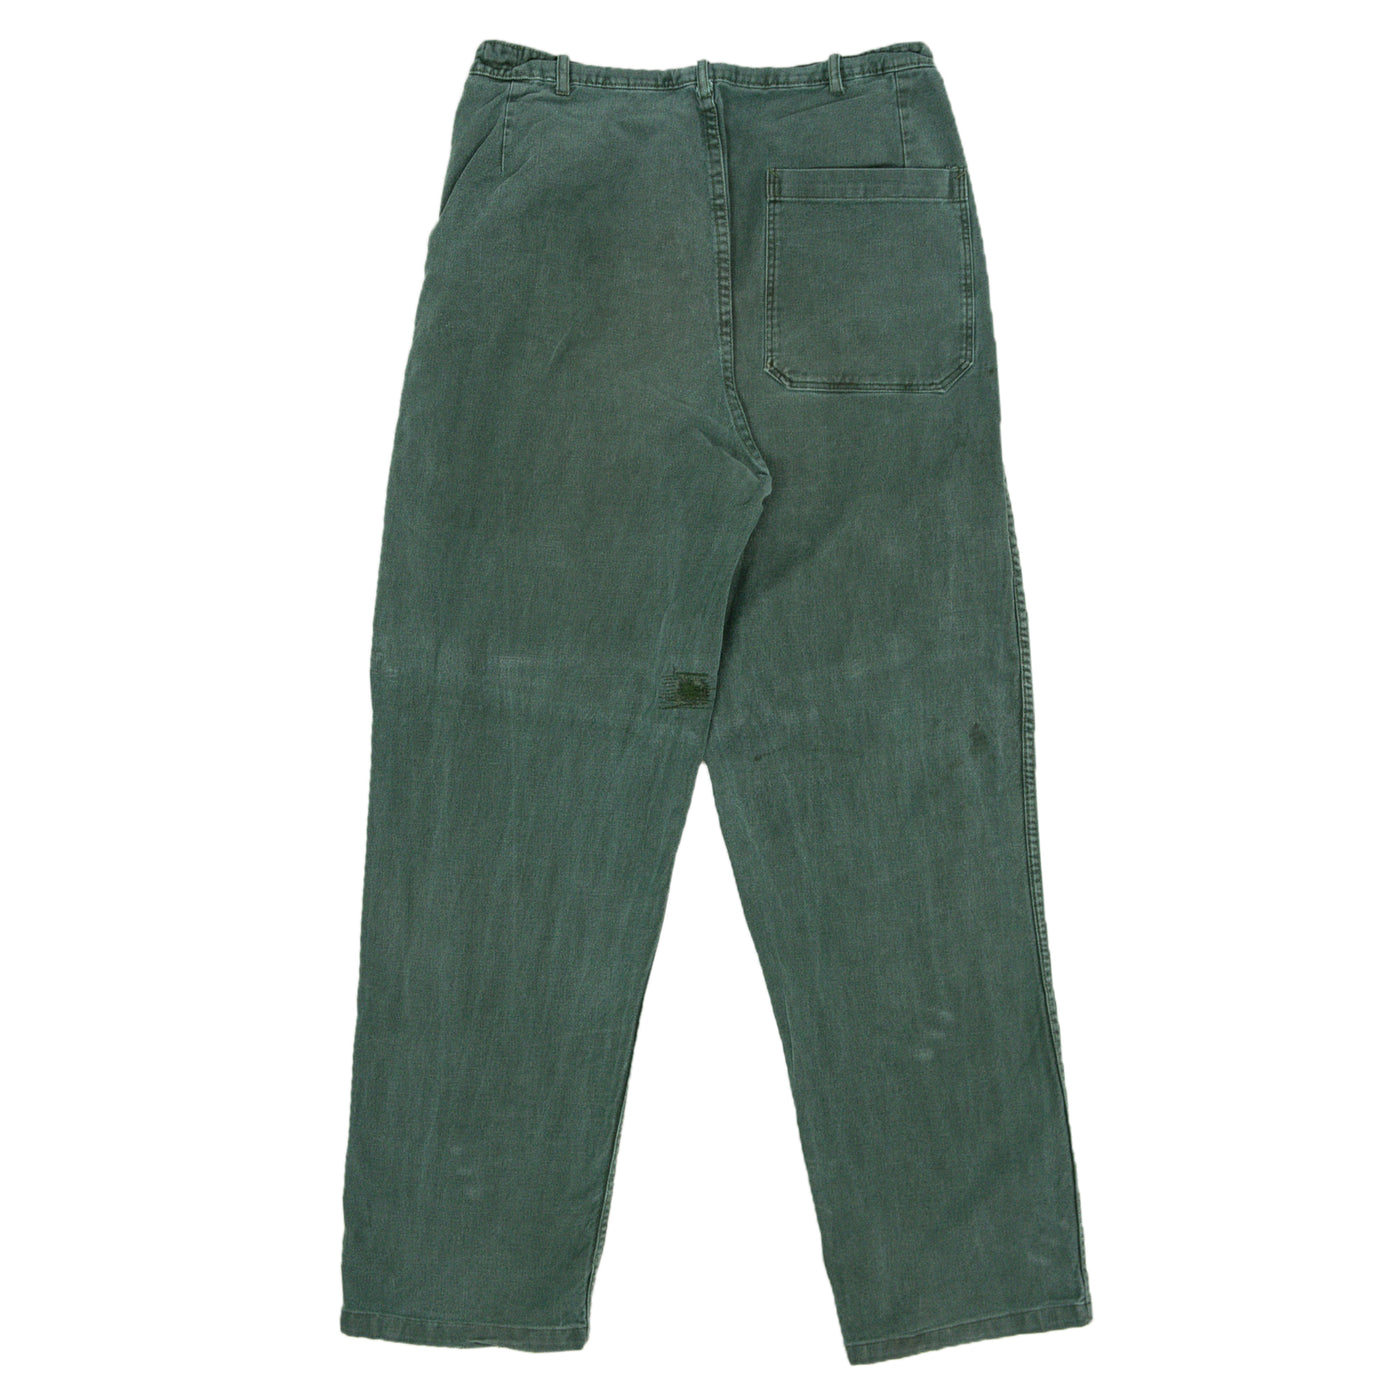 Vintage 70s Distressed Swedish Military Field Trousers Worker Style Green 30 W back